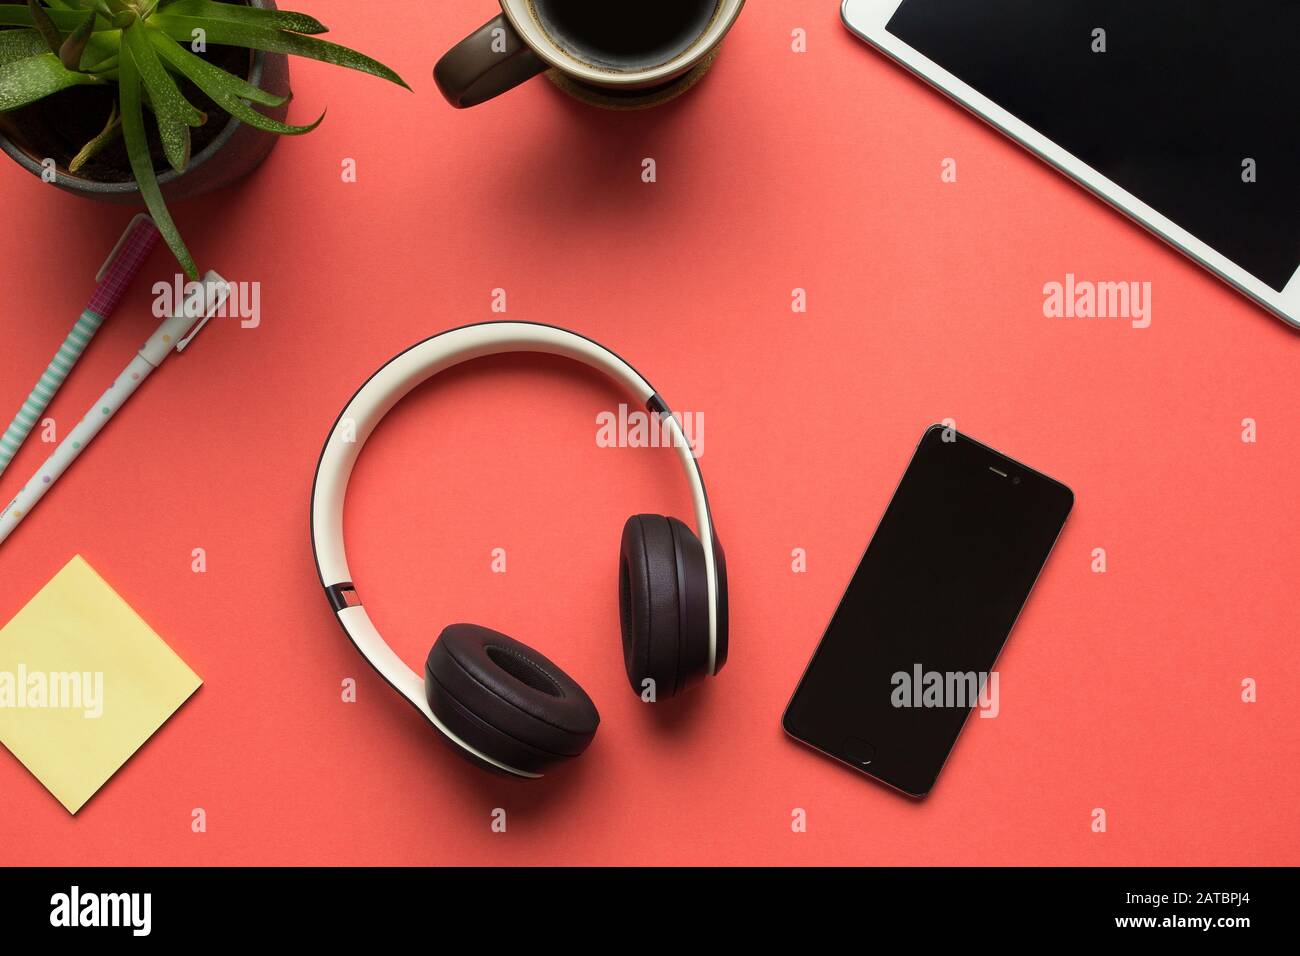 Stock photo of a bluetooth headphones and a smartphone to listen to music on a red background. Some desktop objects around them Stock Photo